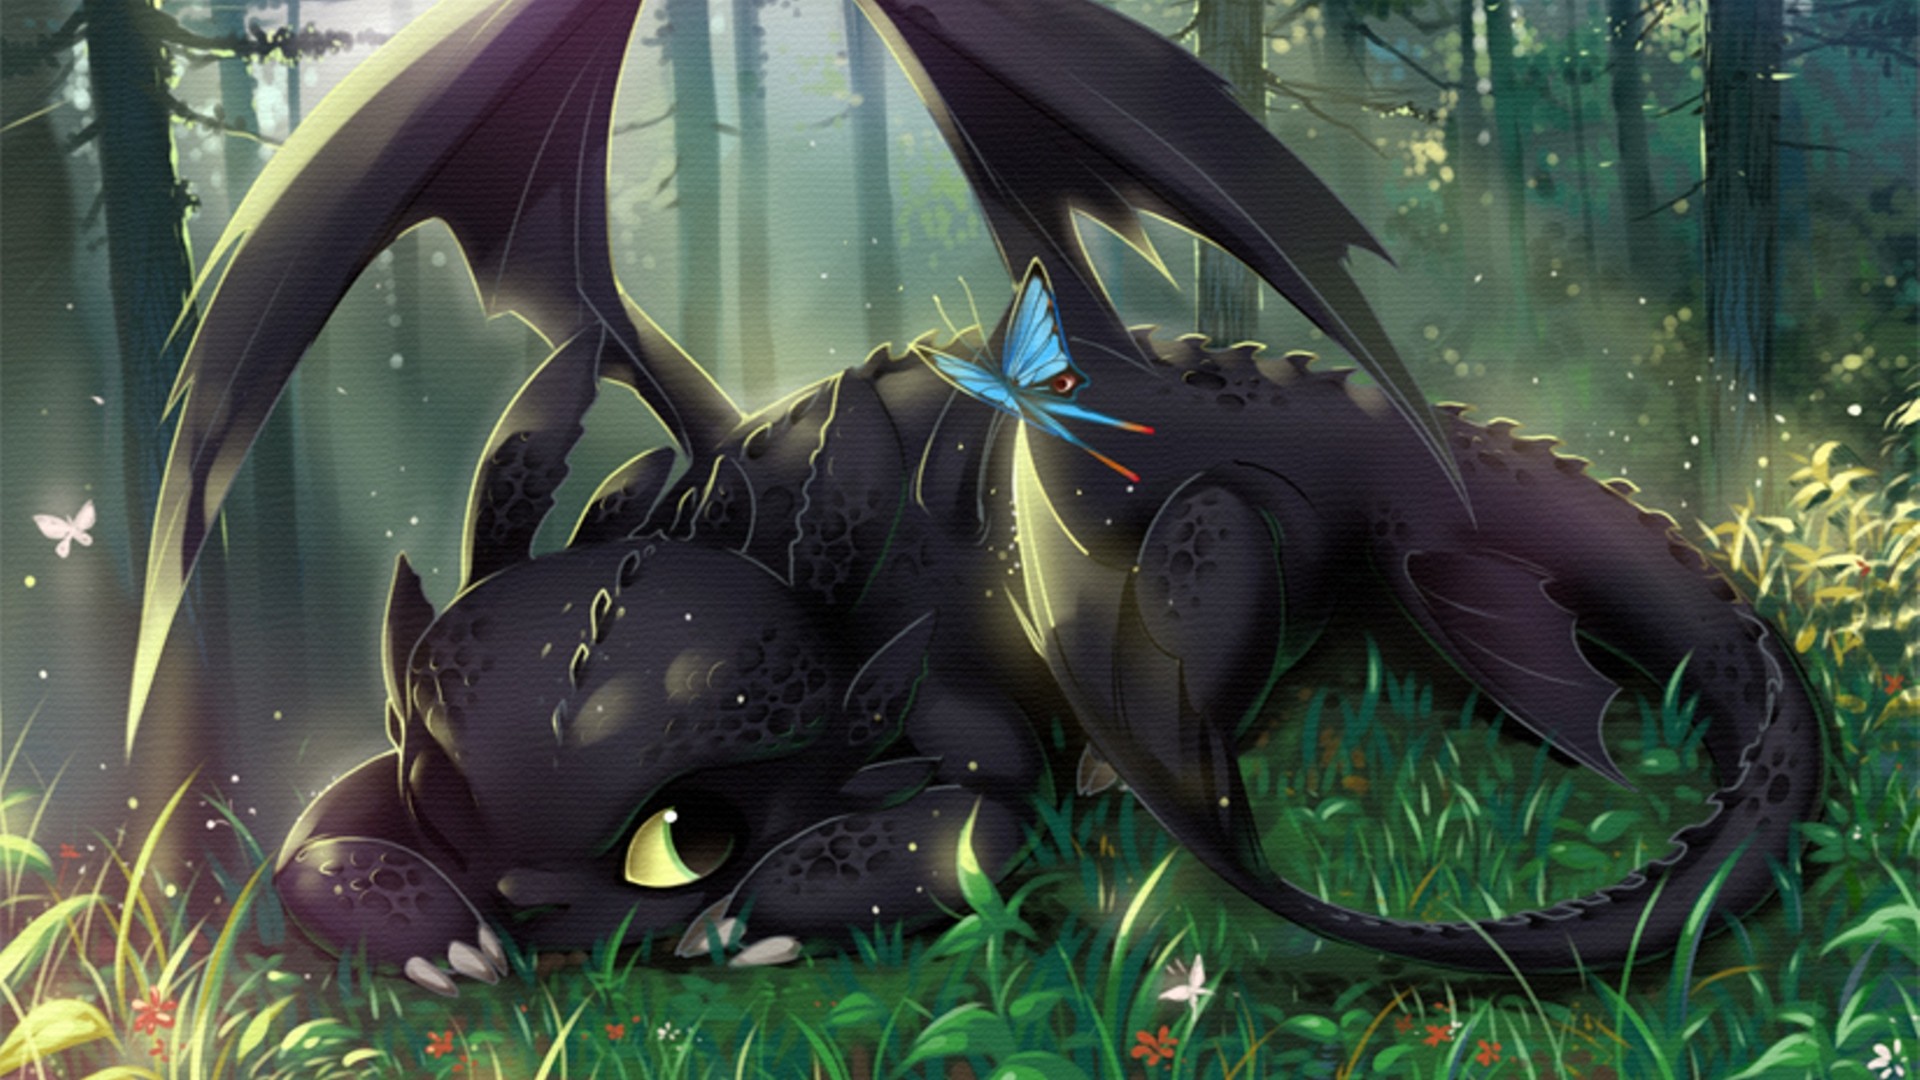 Wallpaper, How to Train Your Dragon, Toothless, jungle, screenshot, 1920x1080 px 1920x1080